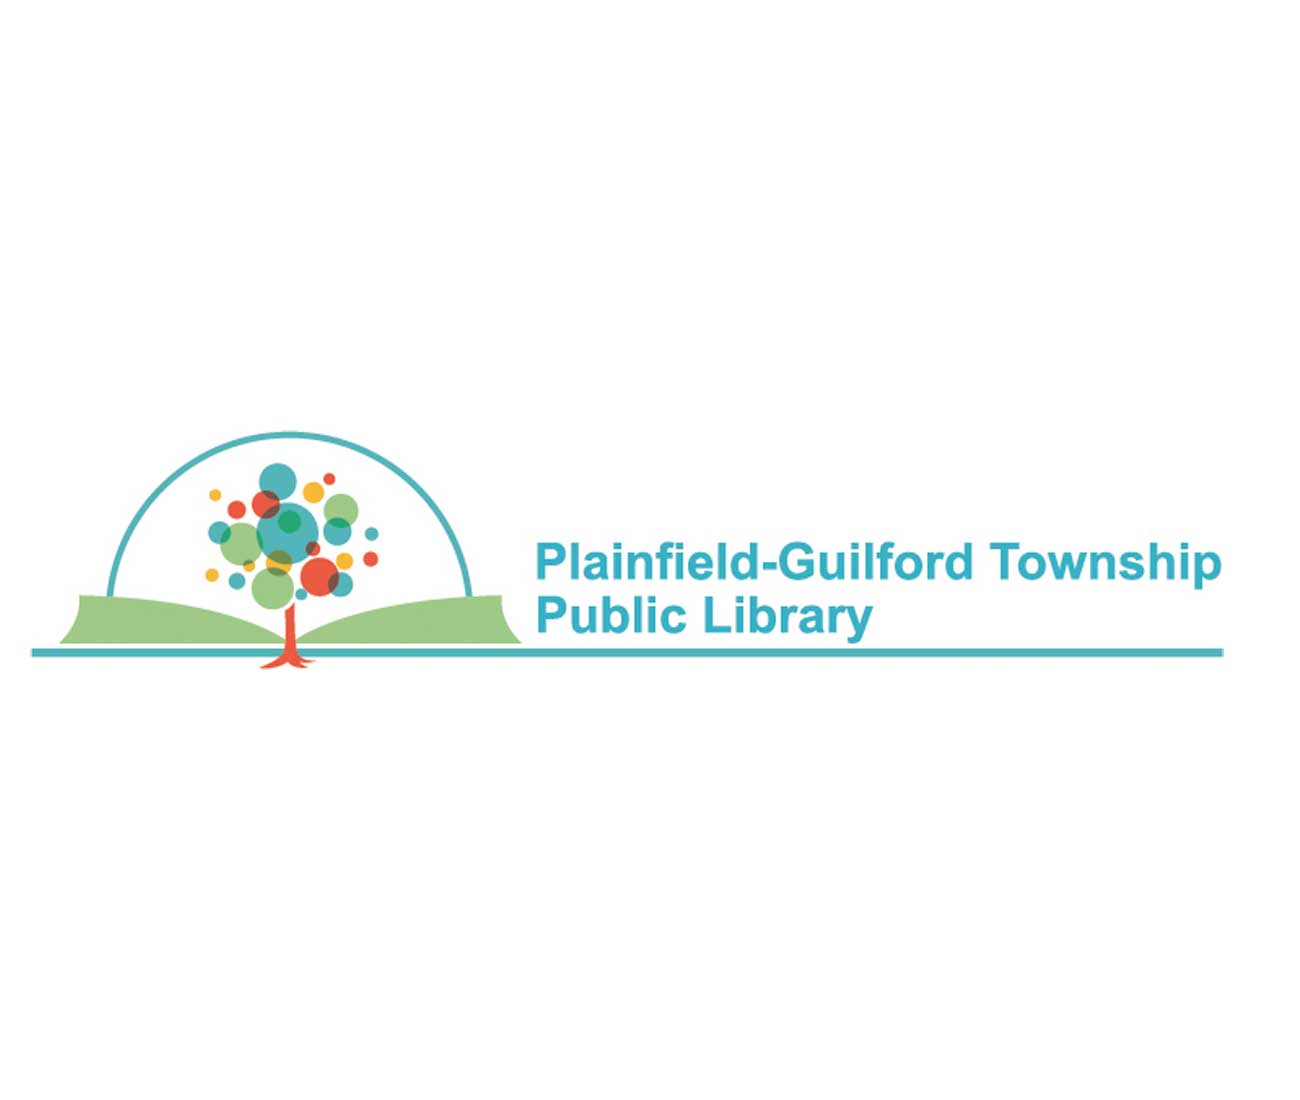 Family Digital Resources - Plainfield-Guilford Township Public Library